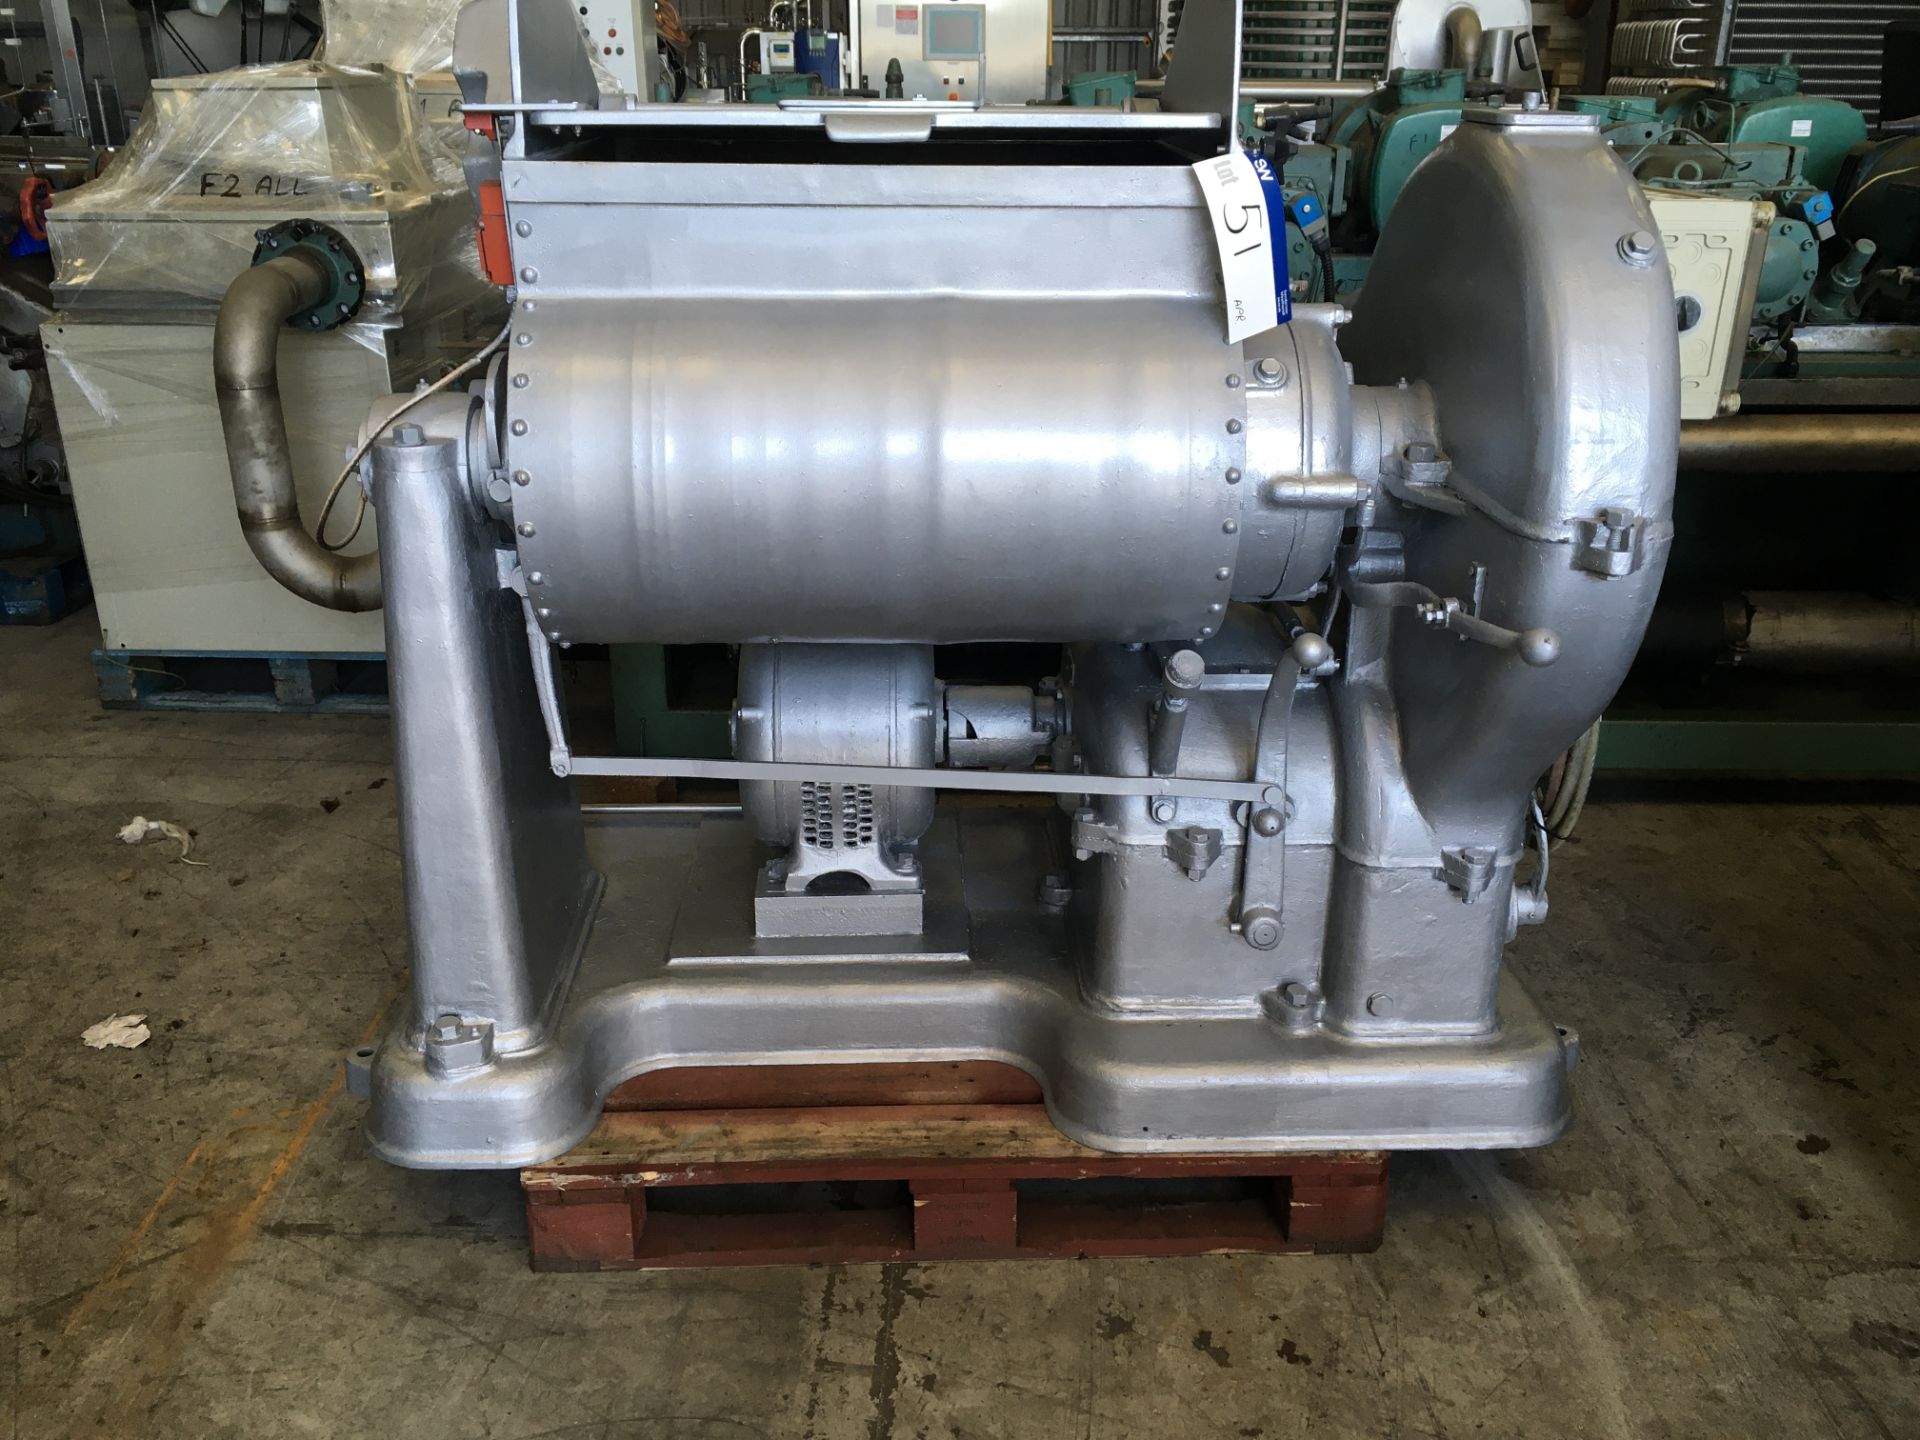 Morton Gridlap GL70 Mixer, approx. 1200mm x 1800mm x 1600mm high, £100 lift out charge